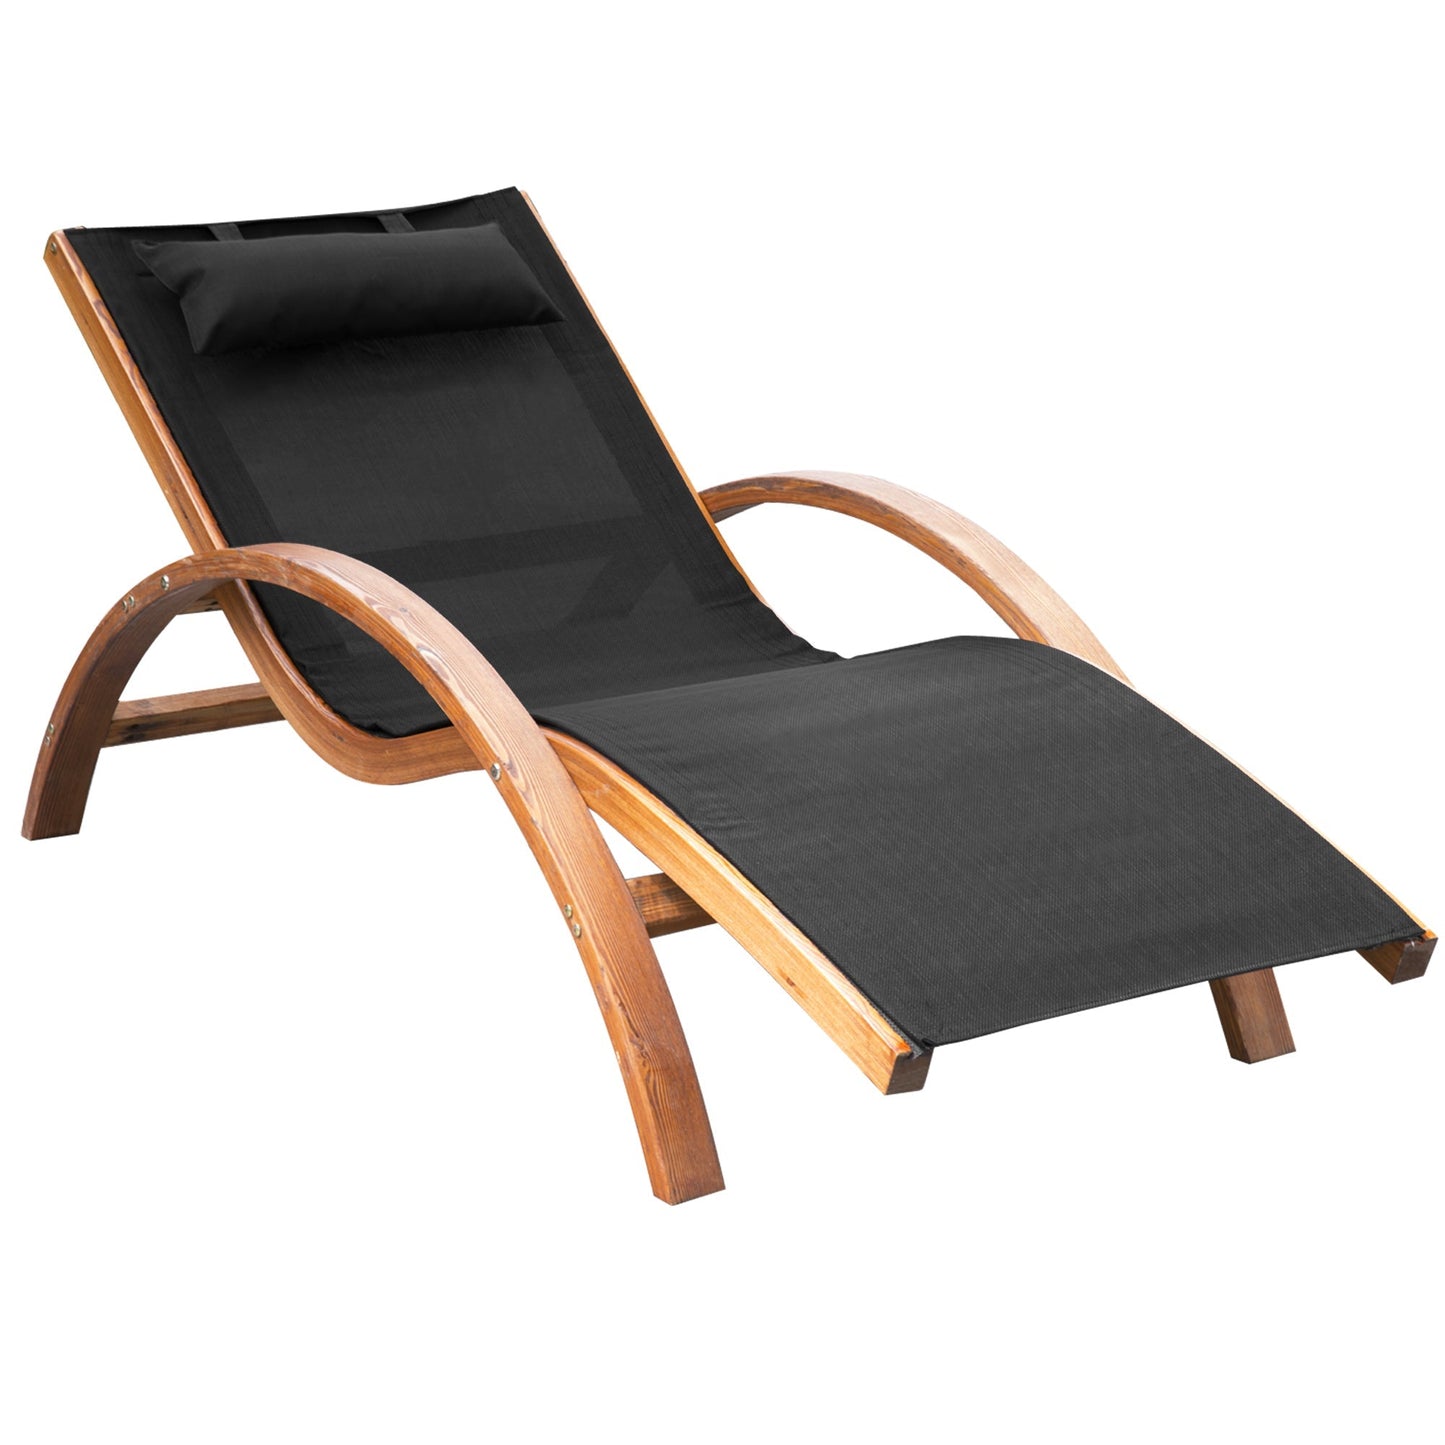 Outsunny sunbathy bed Longue with wooden and net fabric headrest, 165x72x86cm